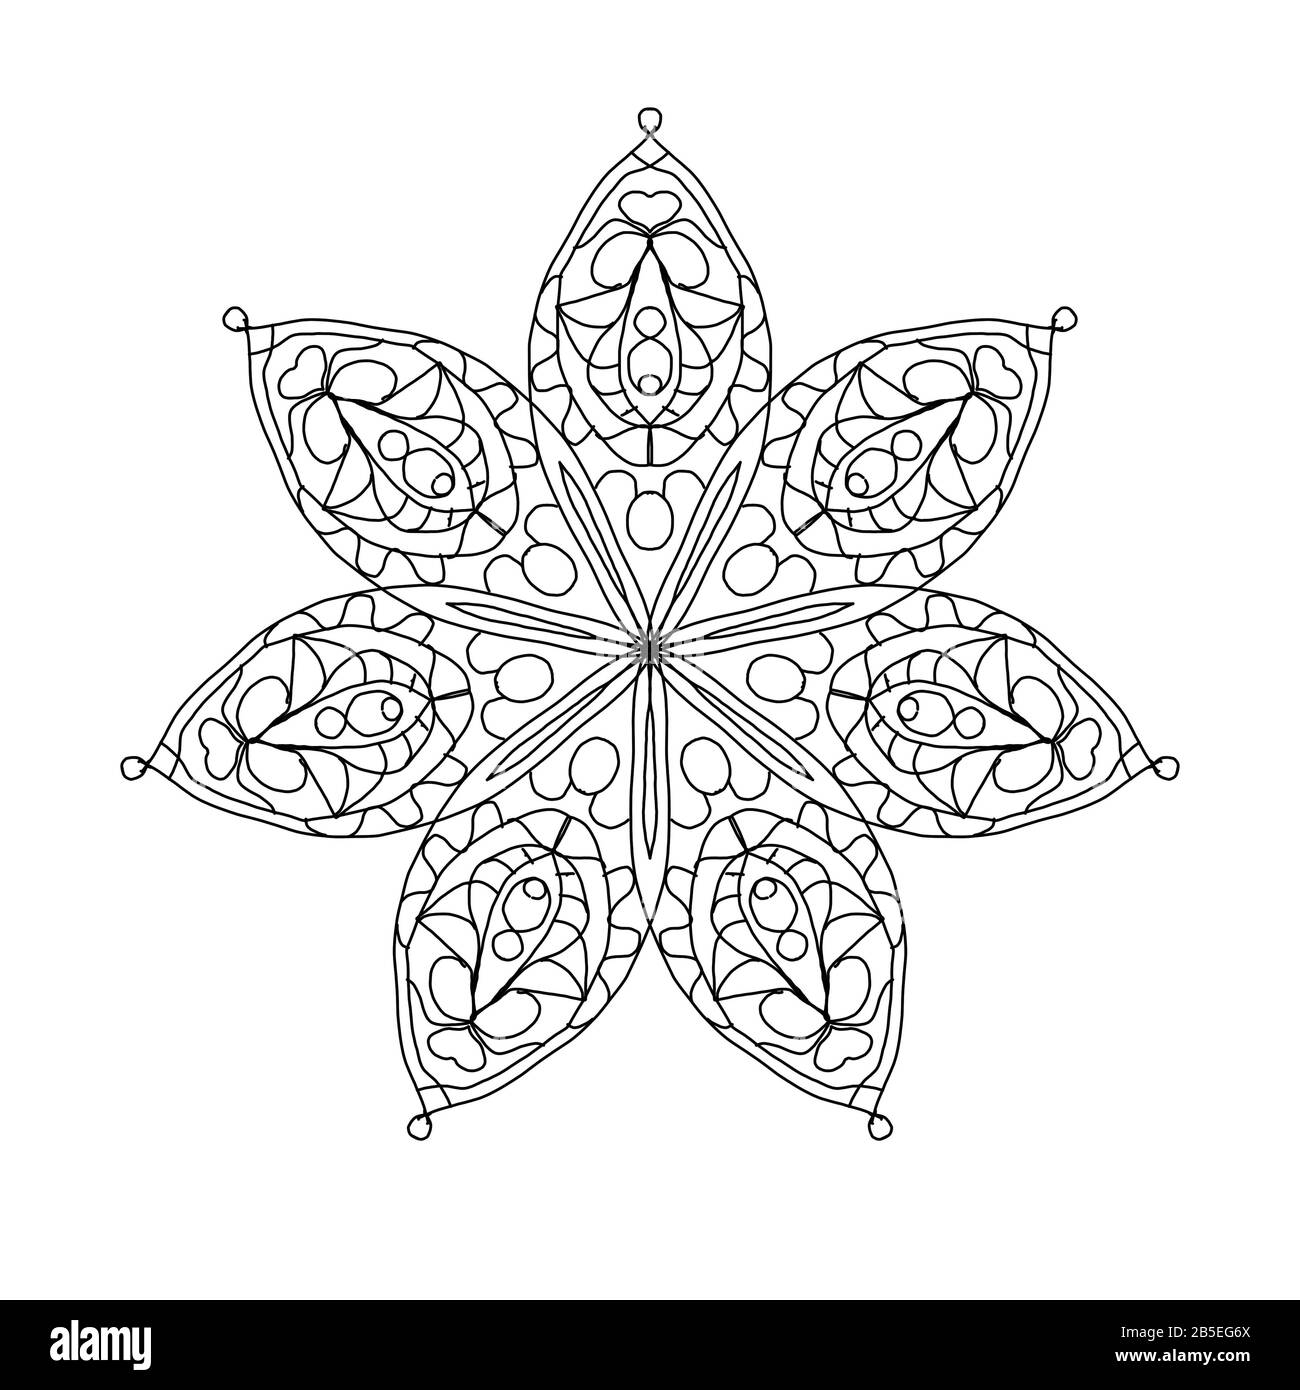 Page Coloring For Adults Floral Design Antistress Coloring Stock